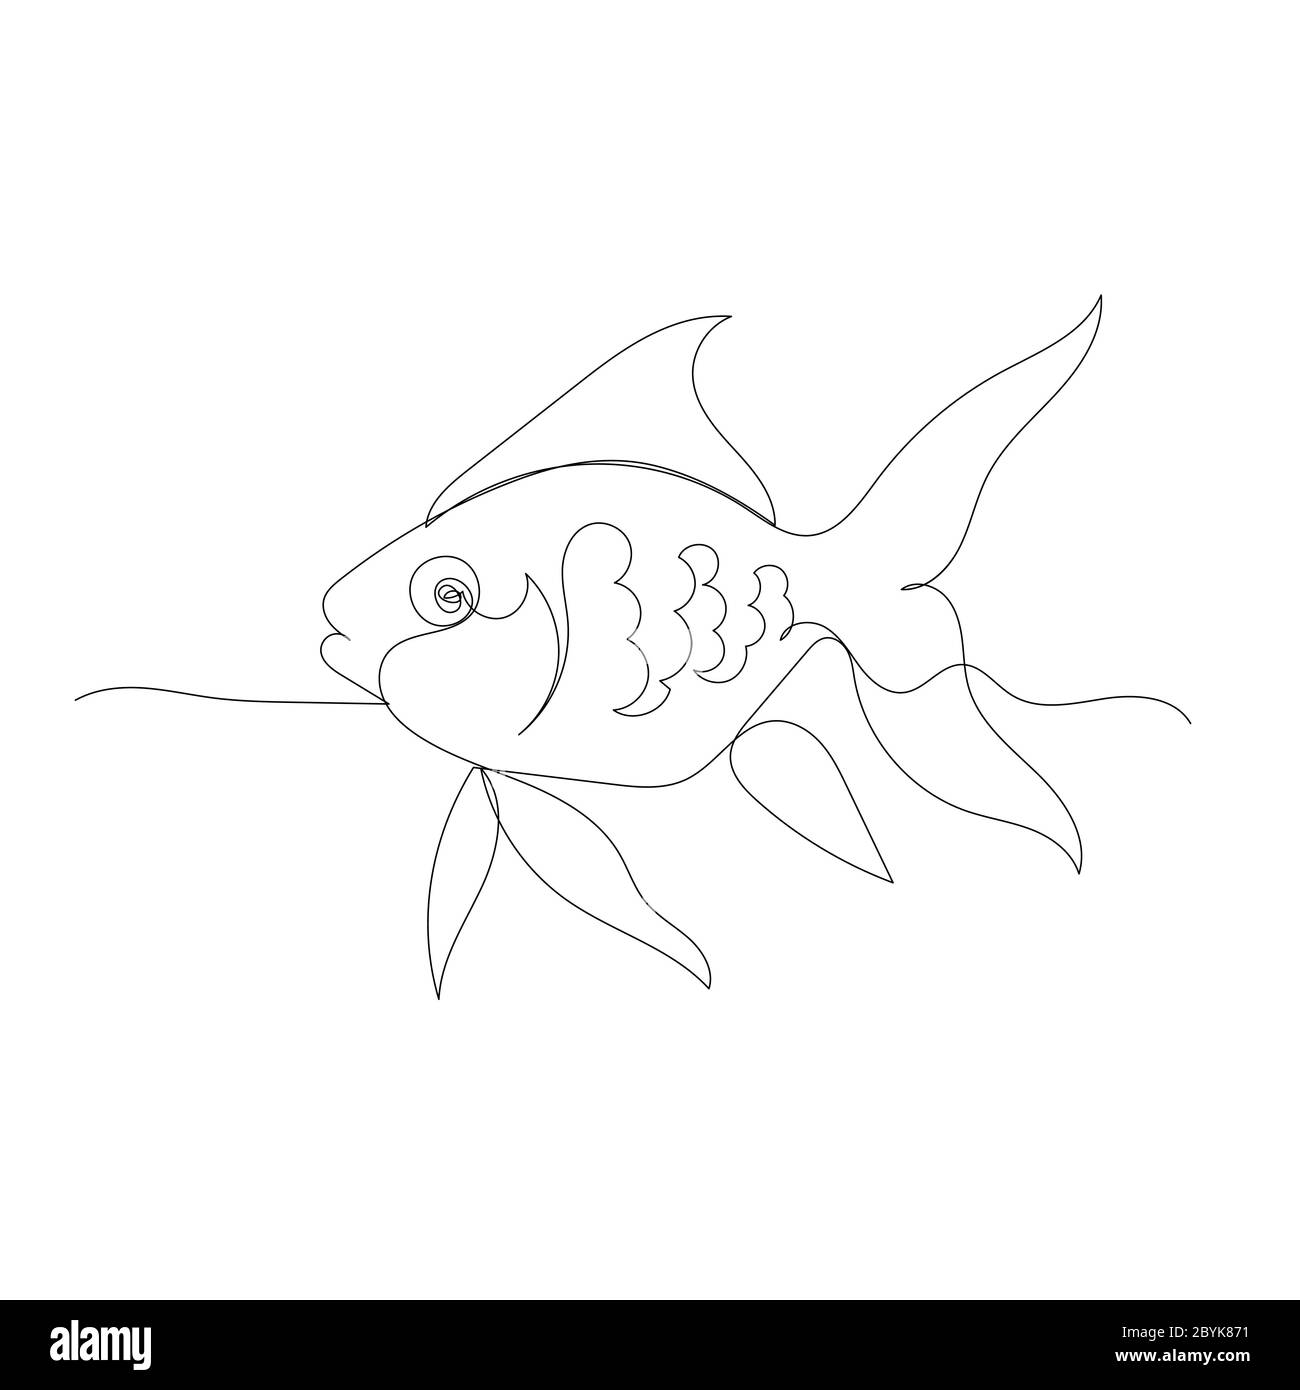 Drawing Lessons: How to Draw a Fish: Step by step